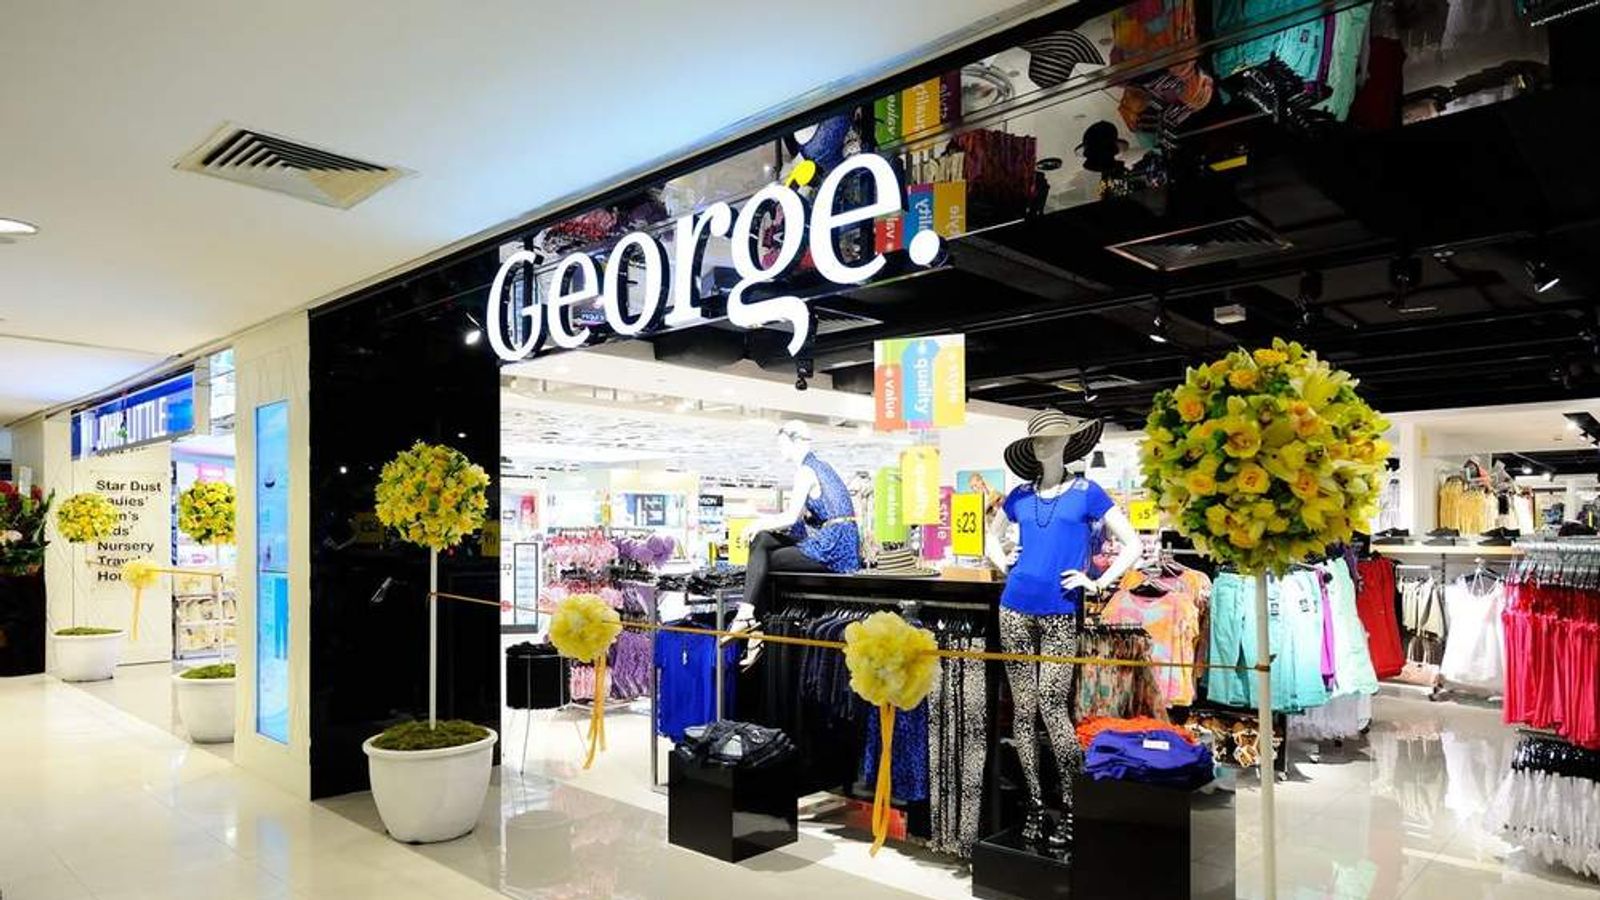 Asda/George products purchased in the UK, by clothing type 2013